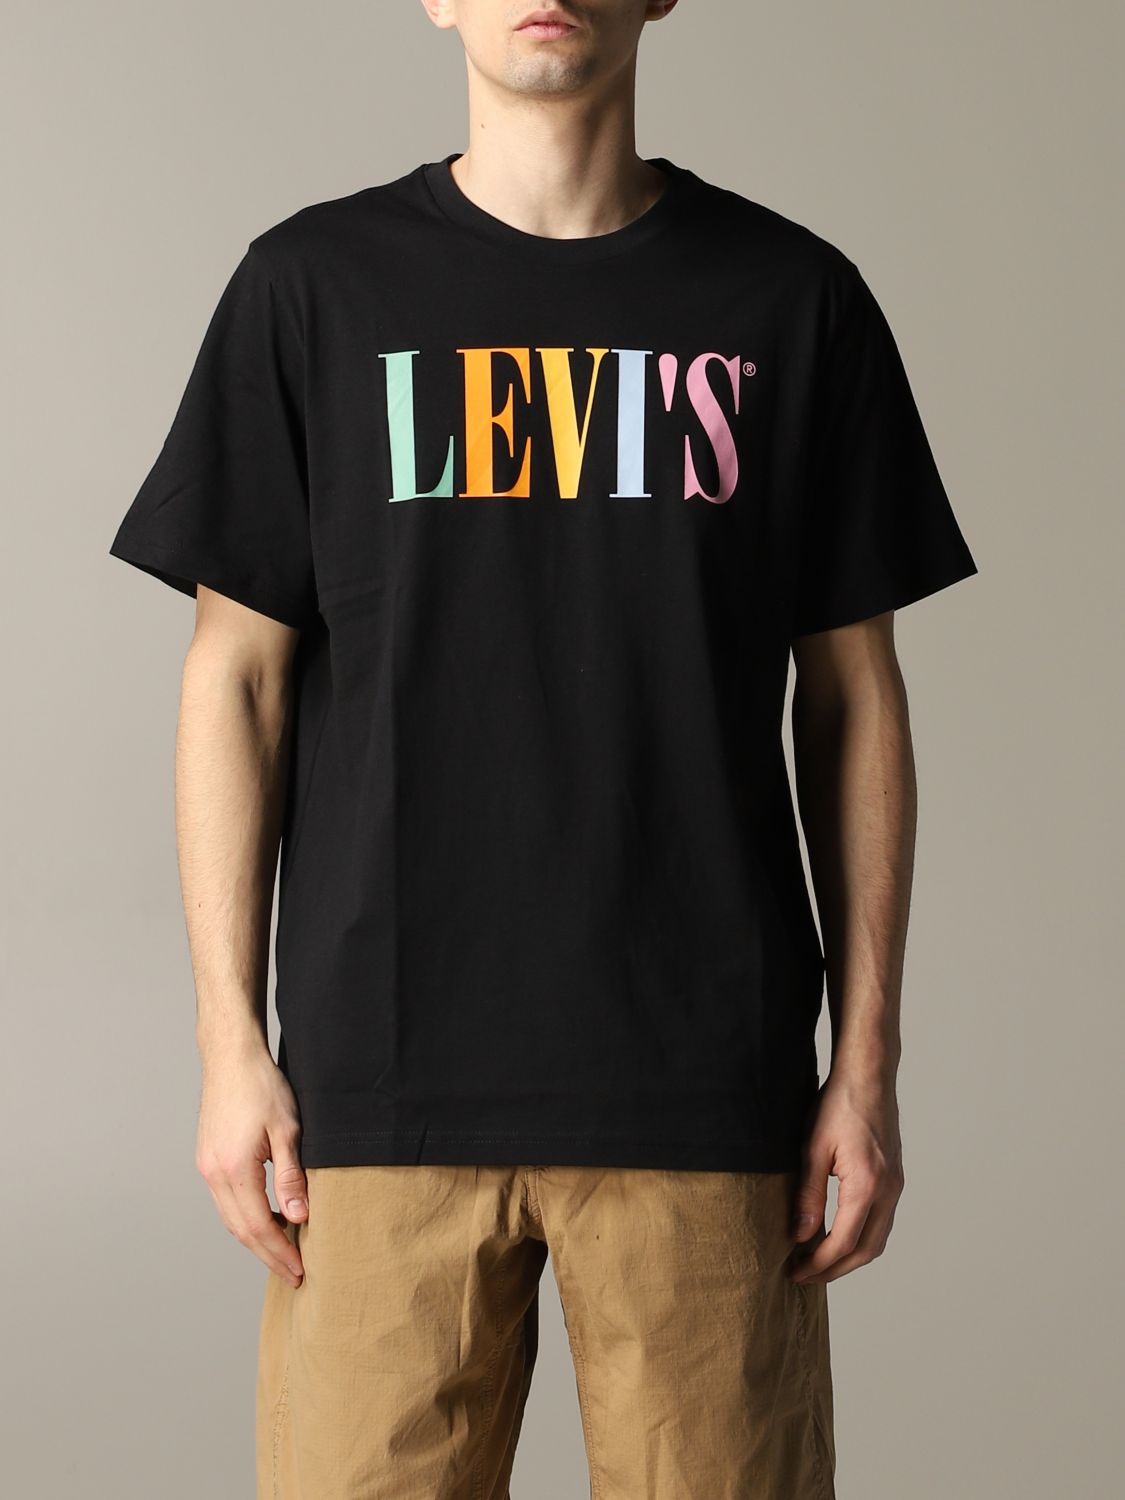 progeny Snake loyalty Levi's Outlet: short-sleeved T-shirt with multicolor logo - Black | Levi's t -shirt 699780044 online on GIGLIO.COM